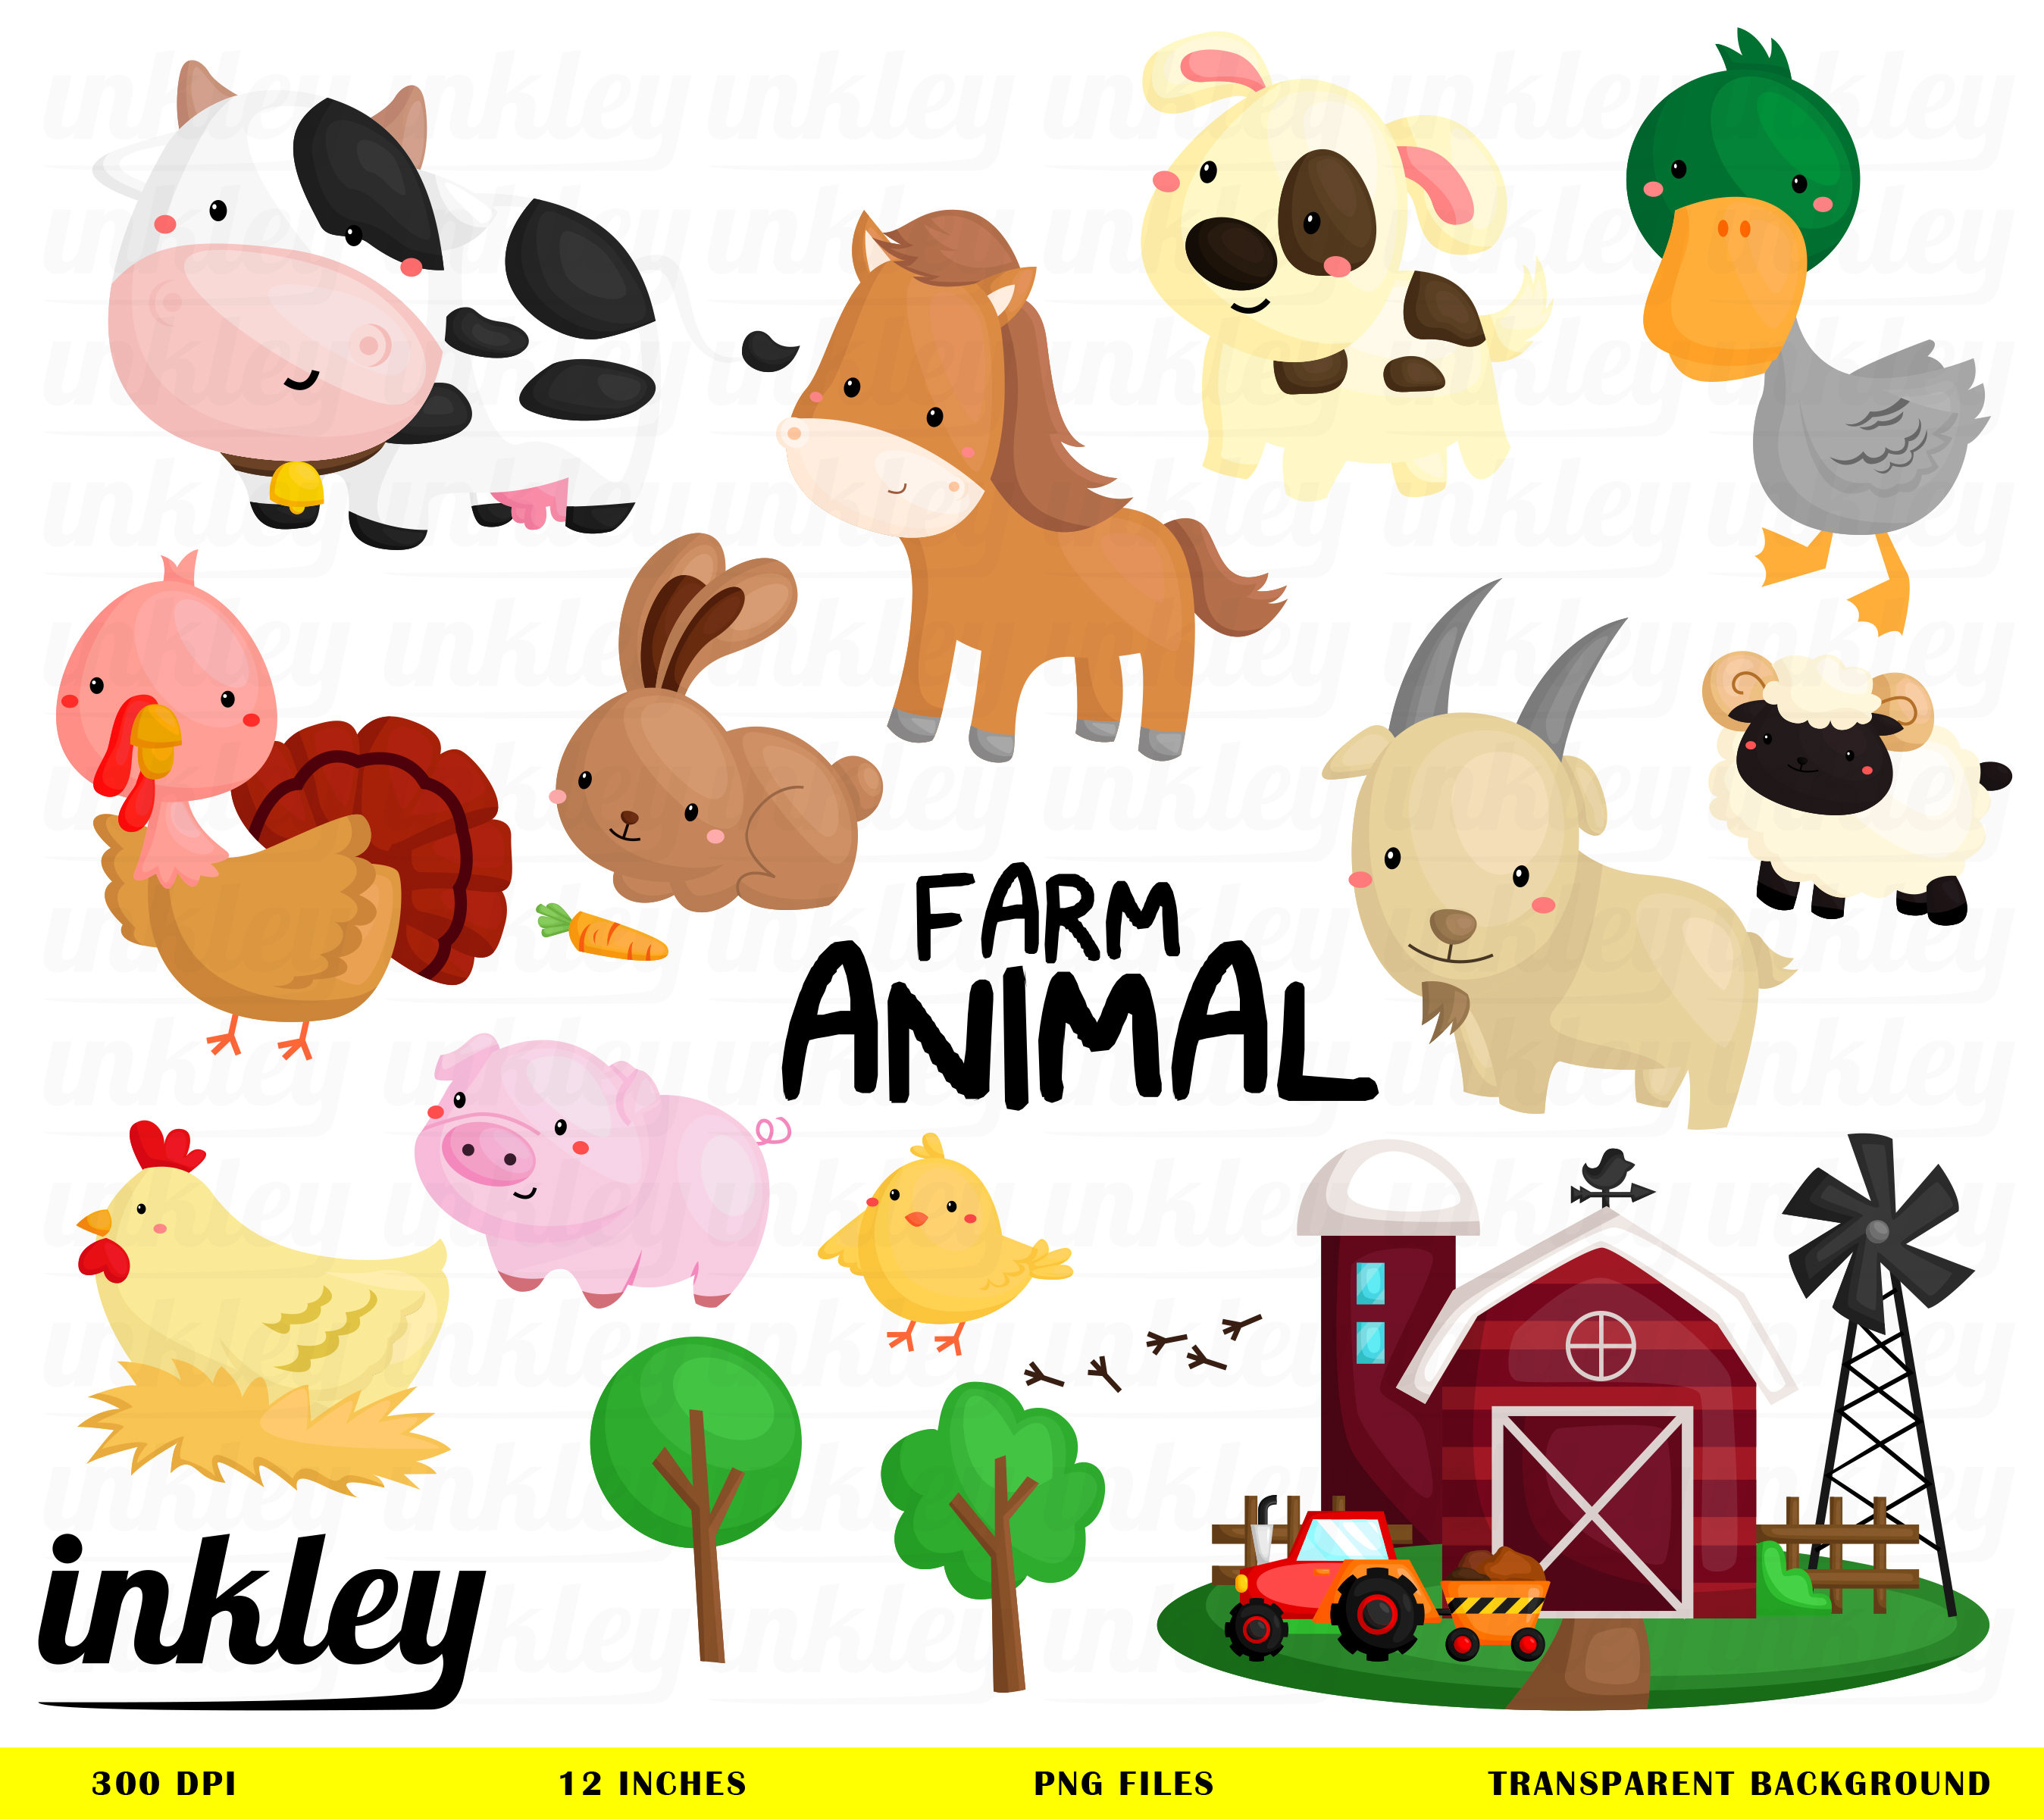 Farm Animal Clipart Farm Animal Clip Art Farm Animal Png